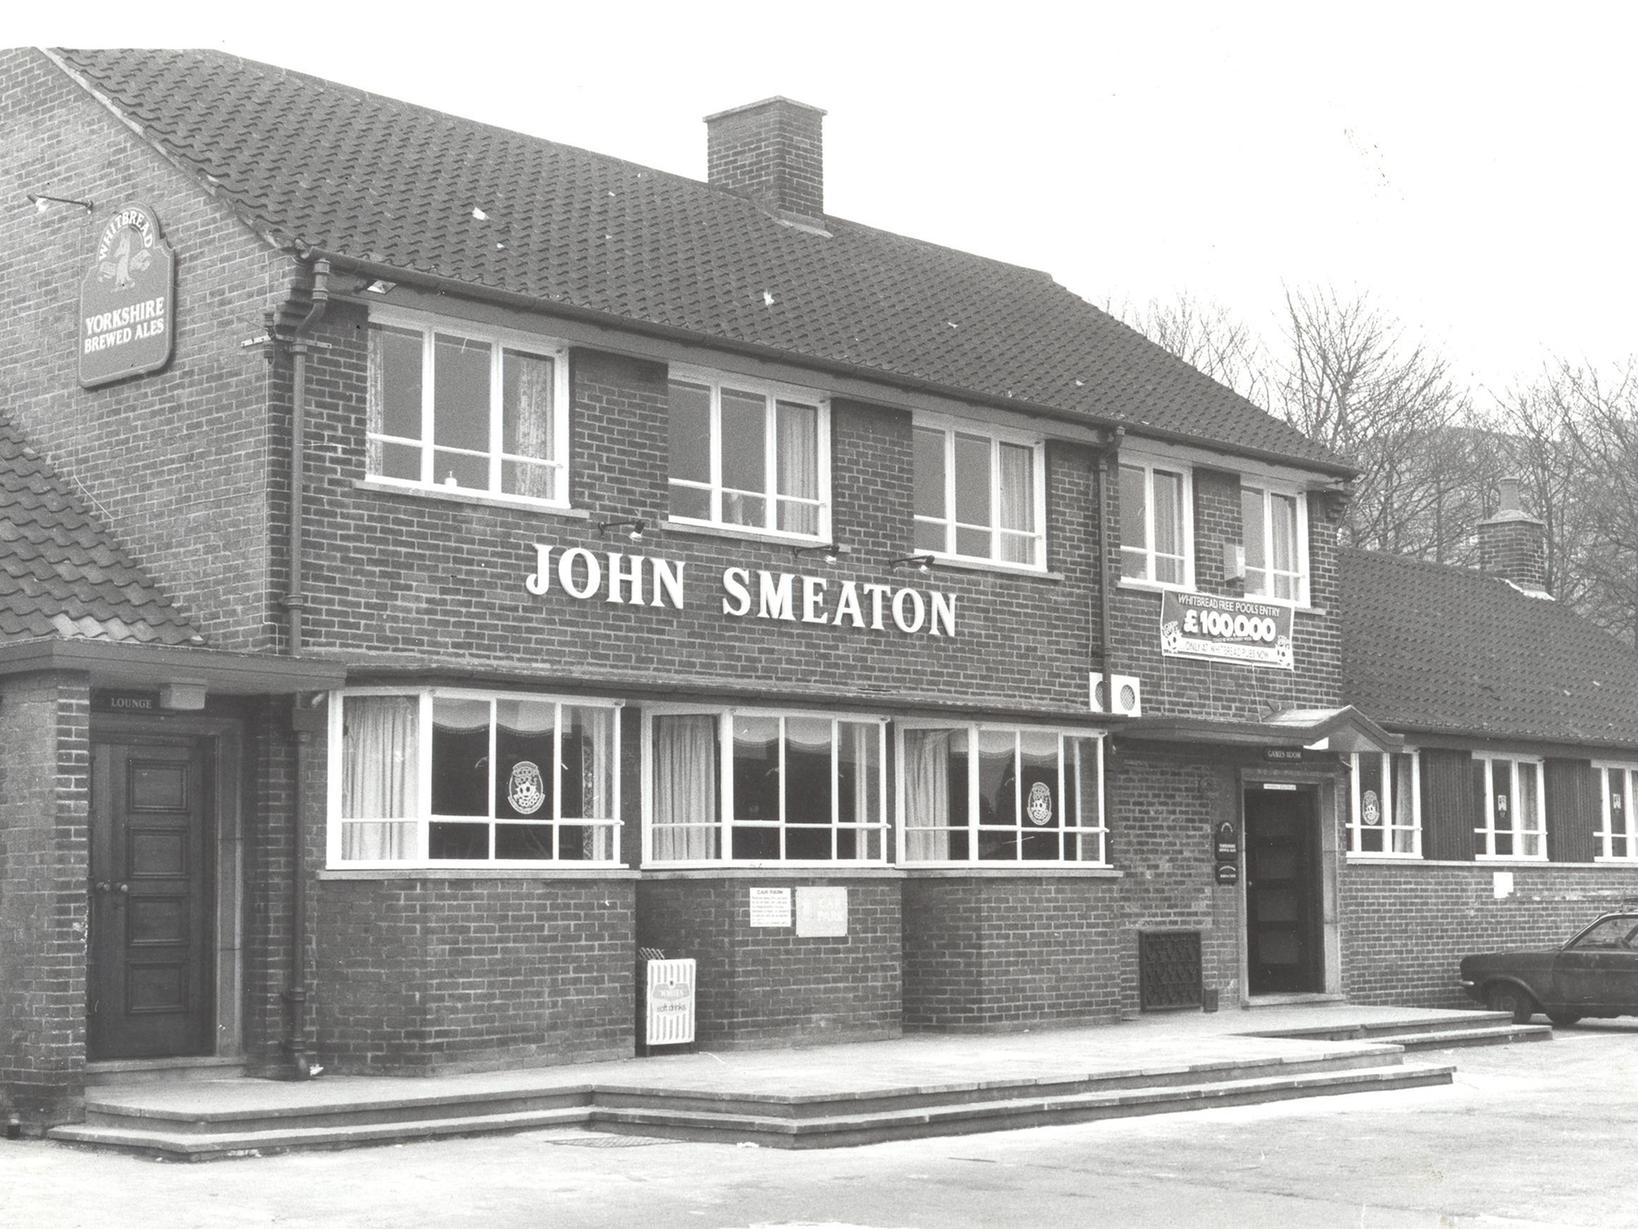 The John Smeaton pub on Swarcliffe Drive. The licensee was John Gaughan in the early 1980s.